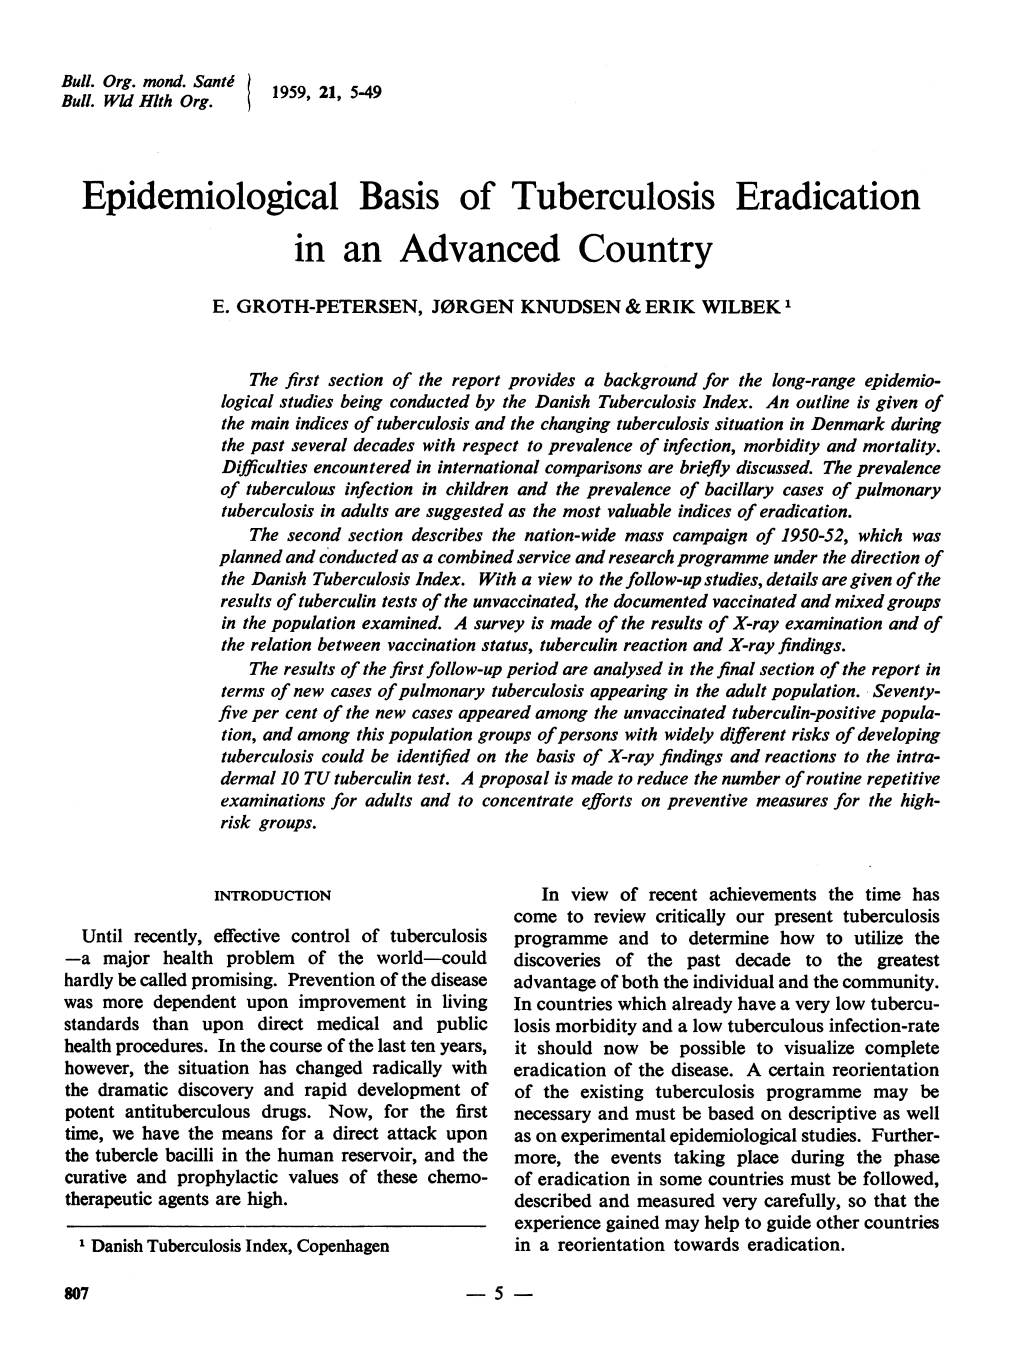 Epidemiological Basis of Tuberculosis Eradication in an Advanced Country